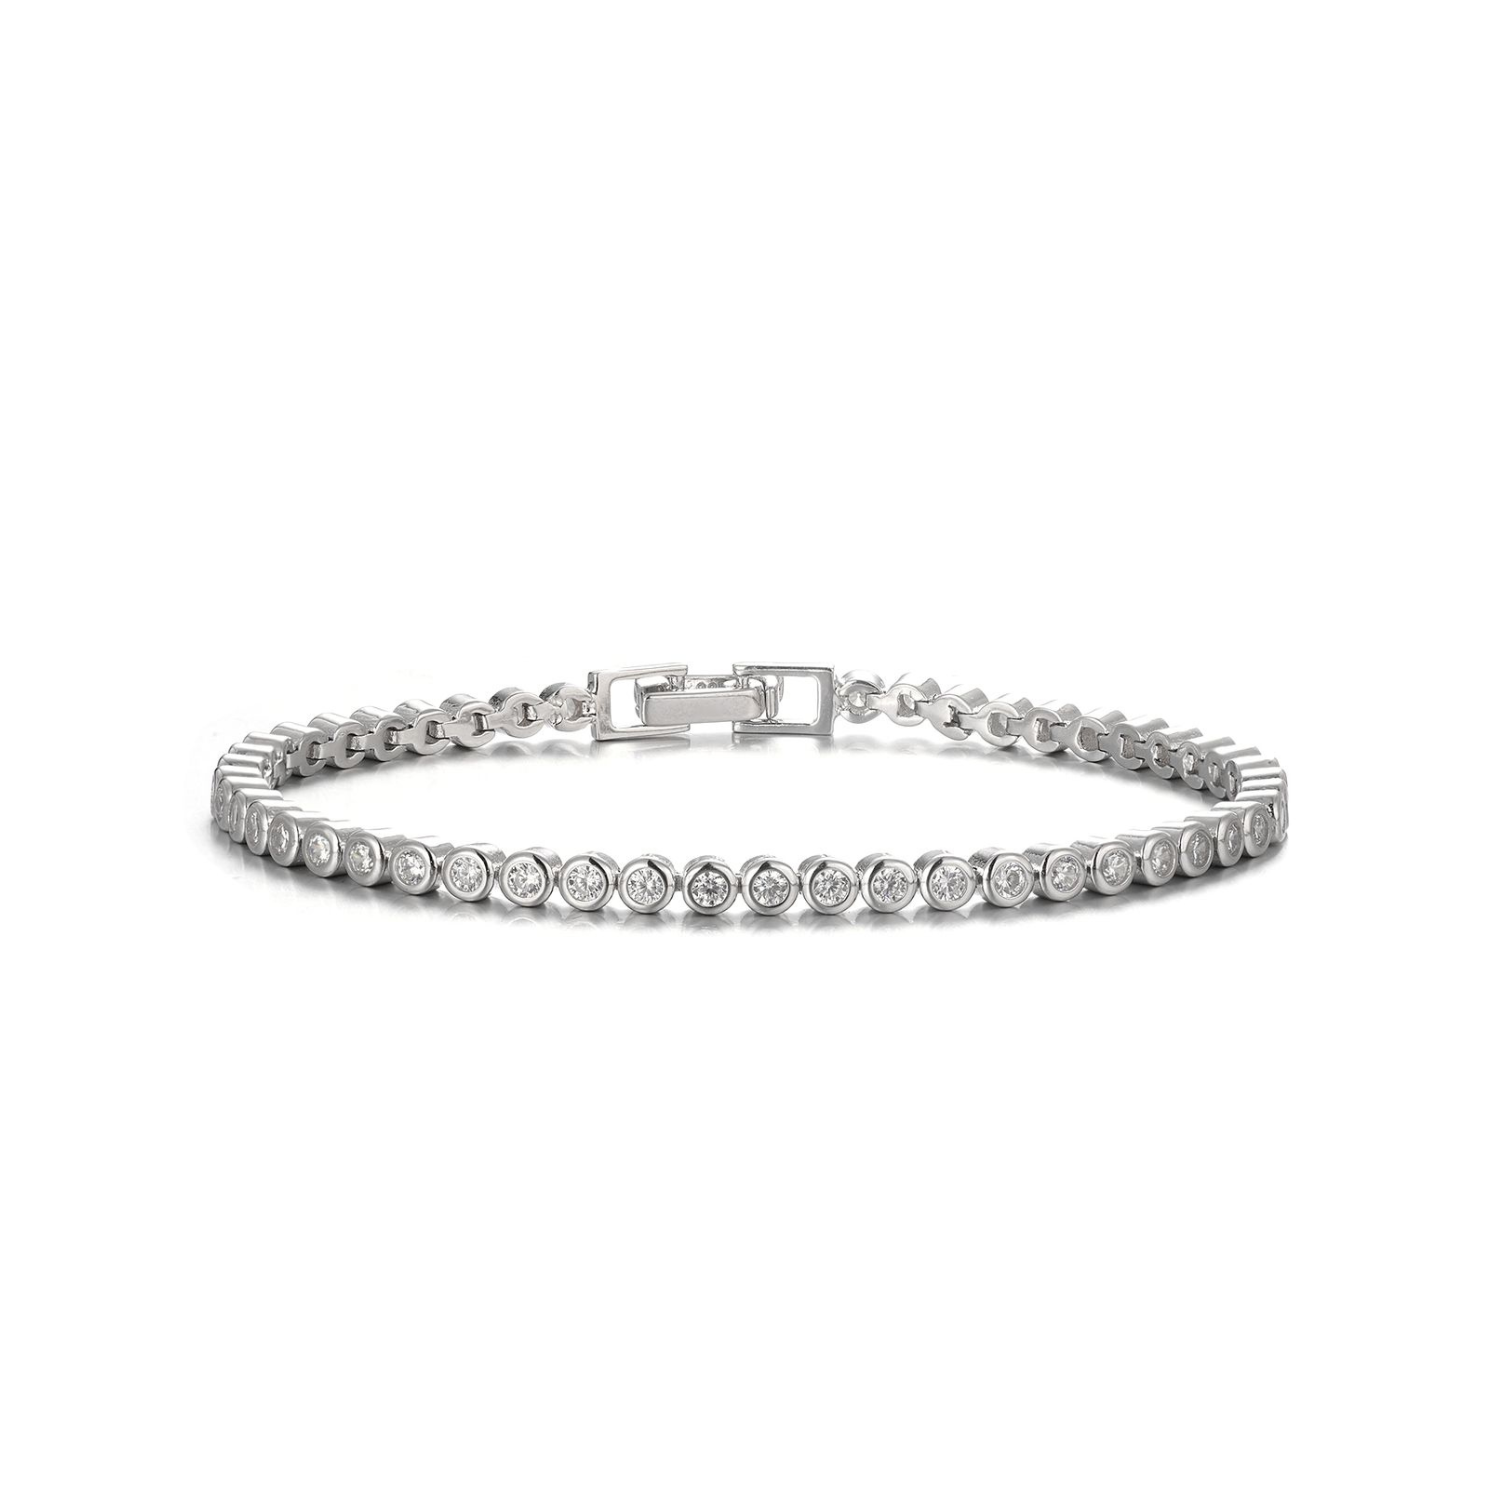 A detailed view of a sterling silver tennis bracelet showcasing its intricate design